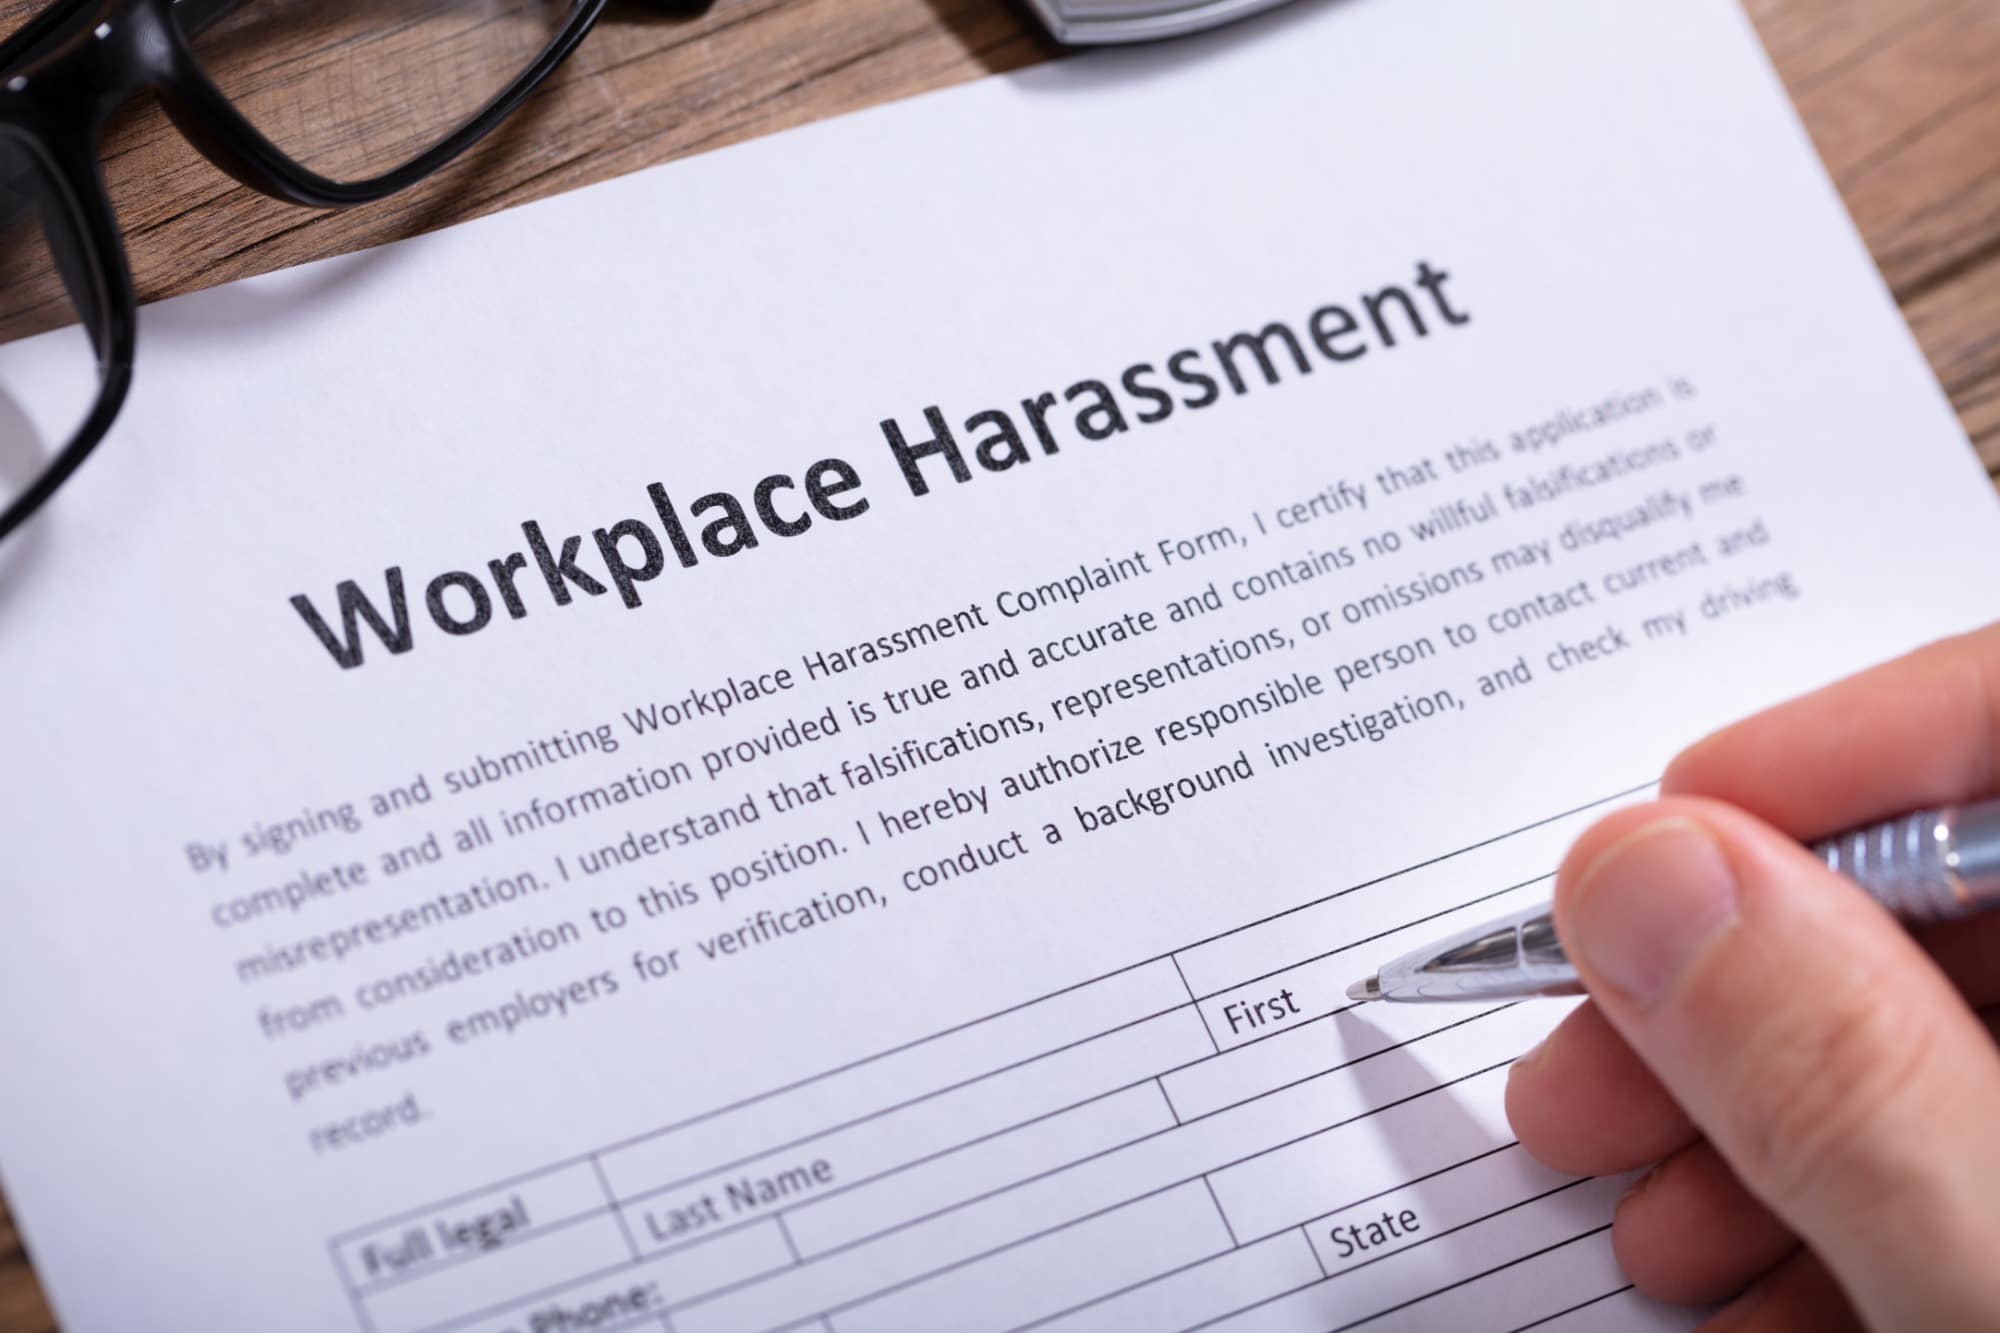 Workplace-Harassment-and-Violence-Risk-Assessment